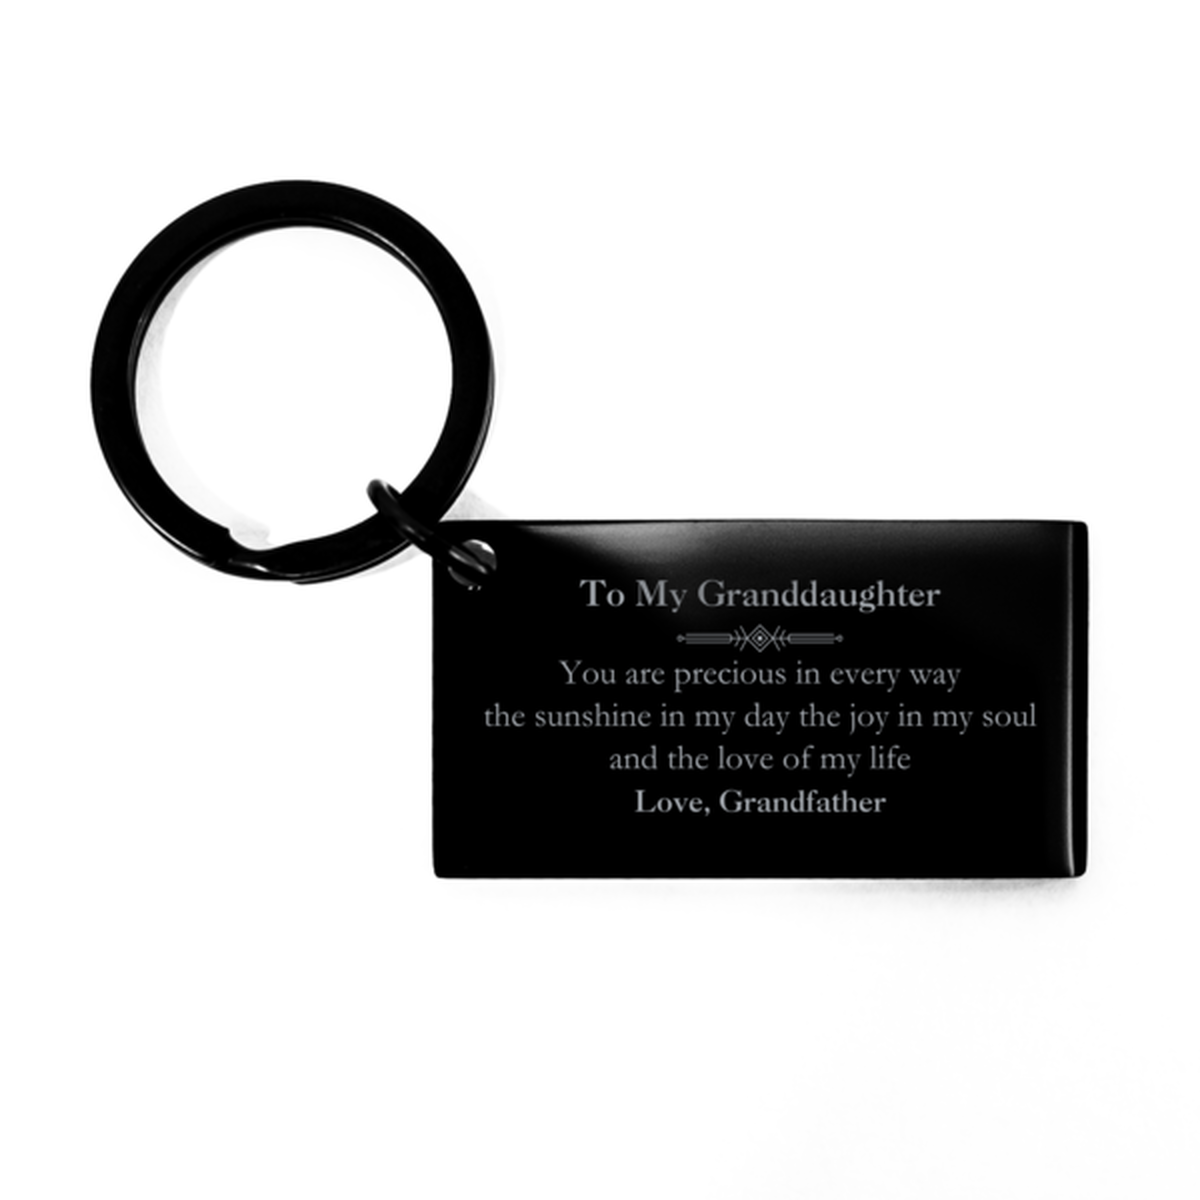 Graduation Gifts for Granddaughter Keychain Present from Grandfather, Christmas Granddaughter Birthday Gifts Granddaughter You are precious in every way the sunshine in my day. Love, Grandfather